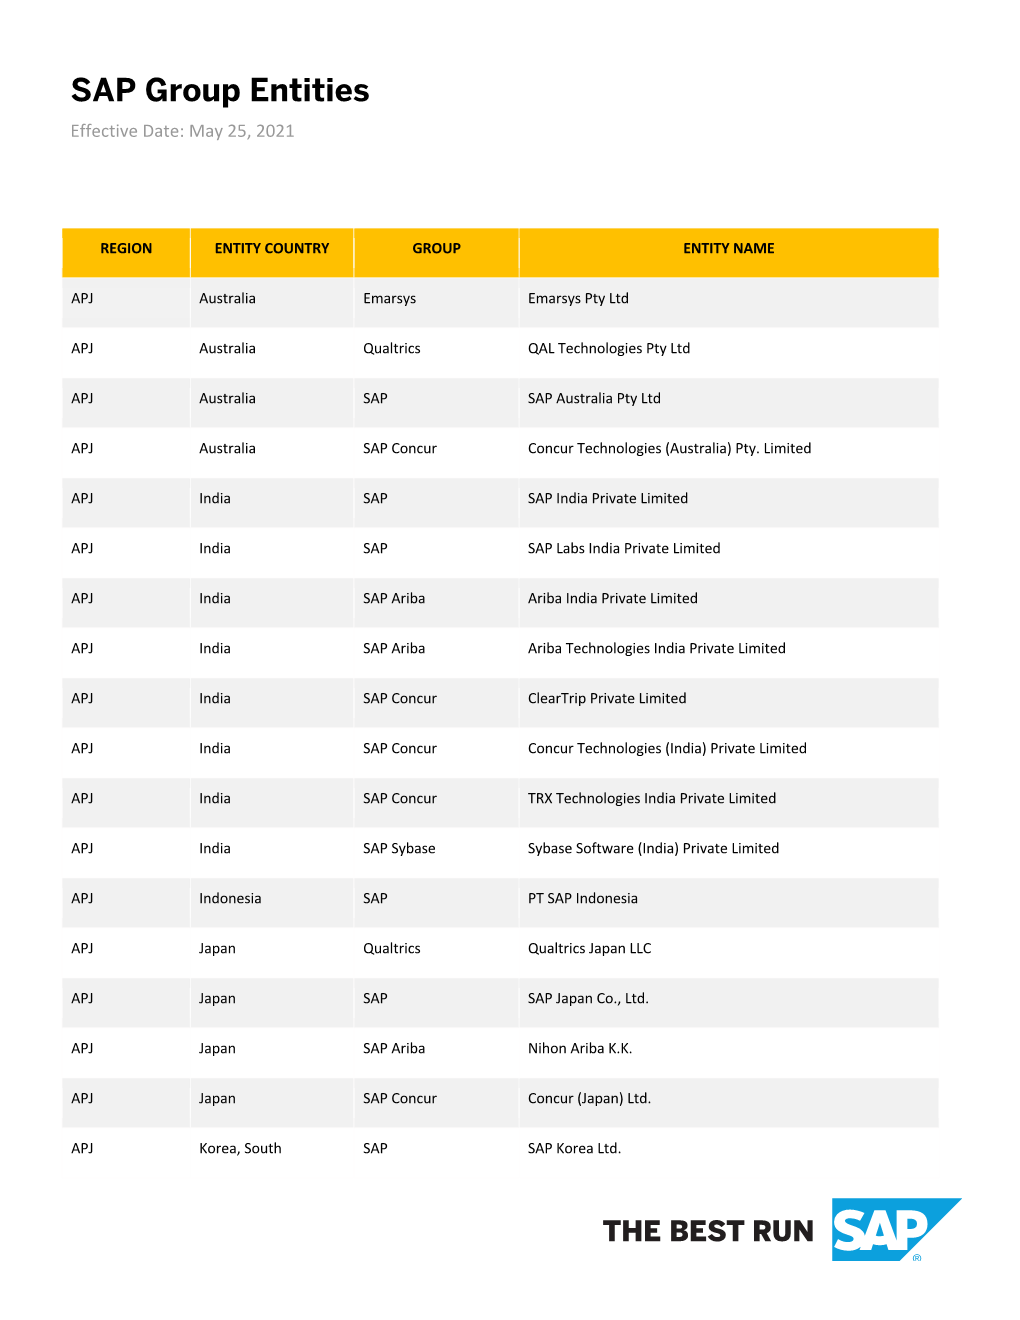 SAP Group Entities Effective Date: May 25, 2021